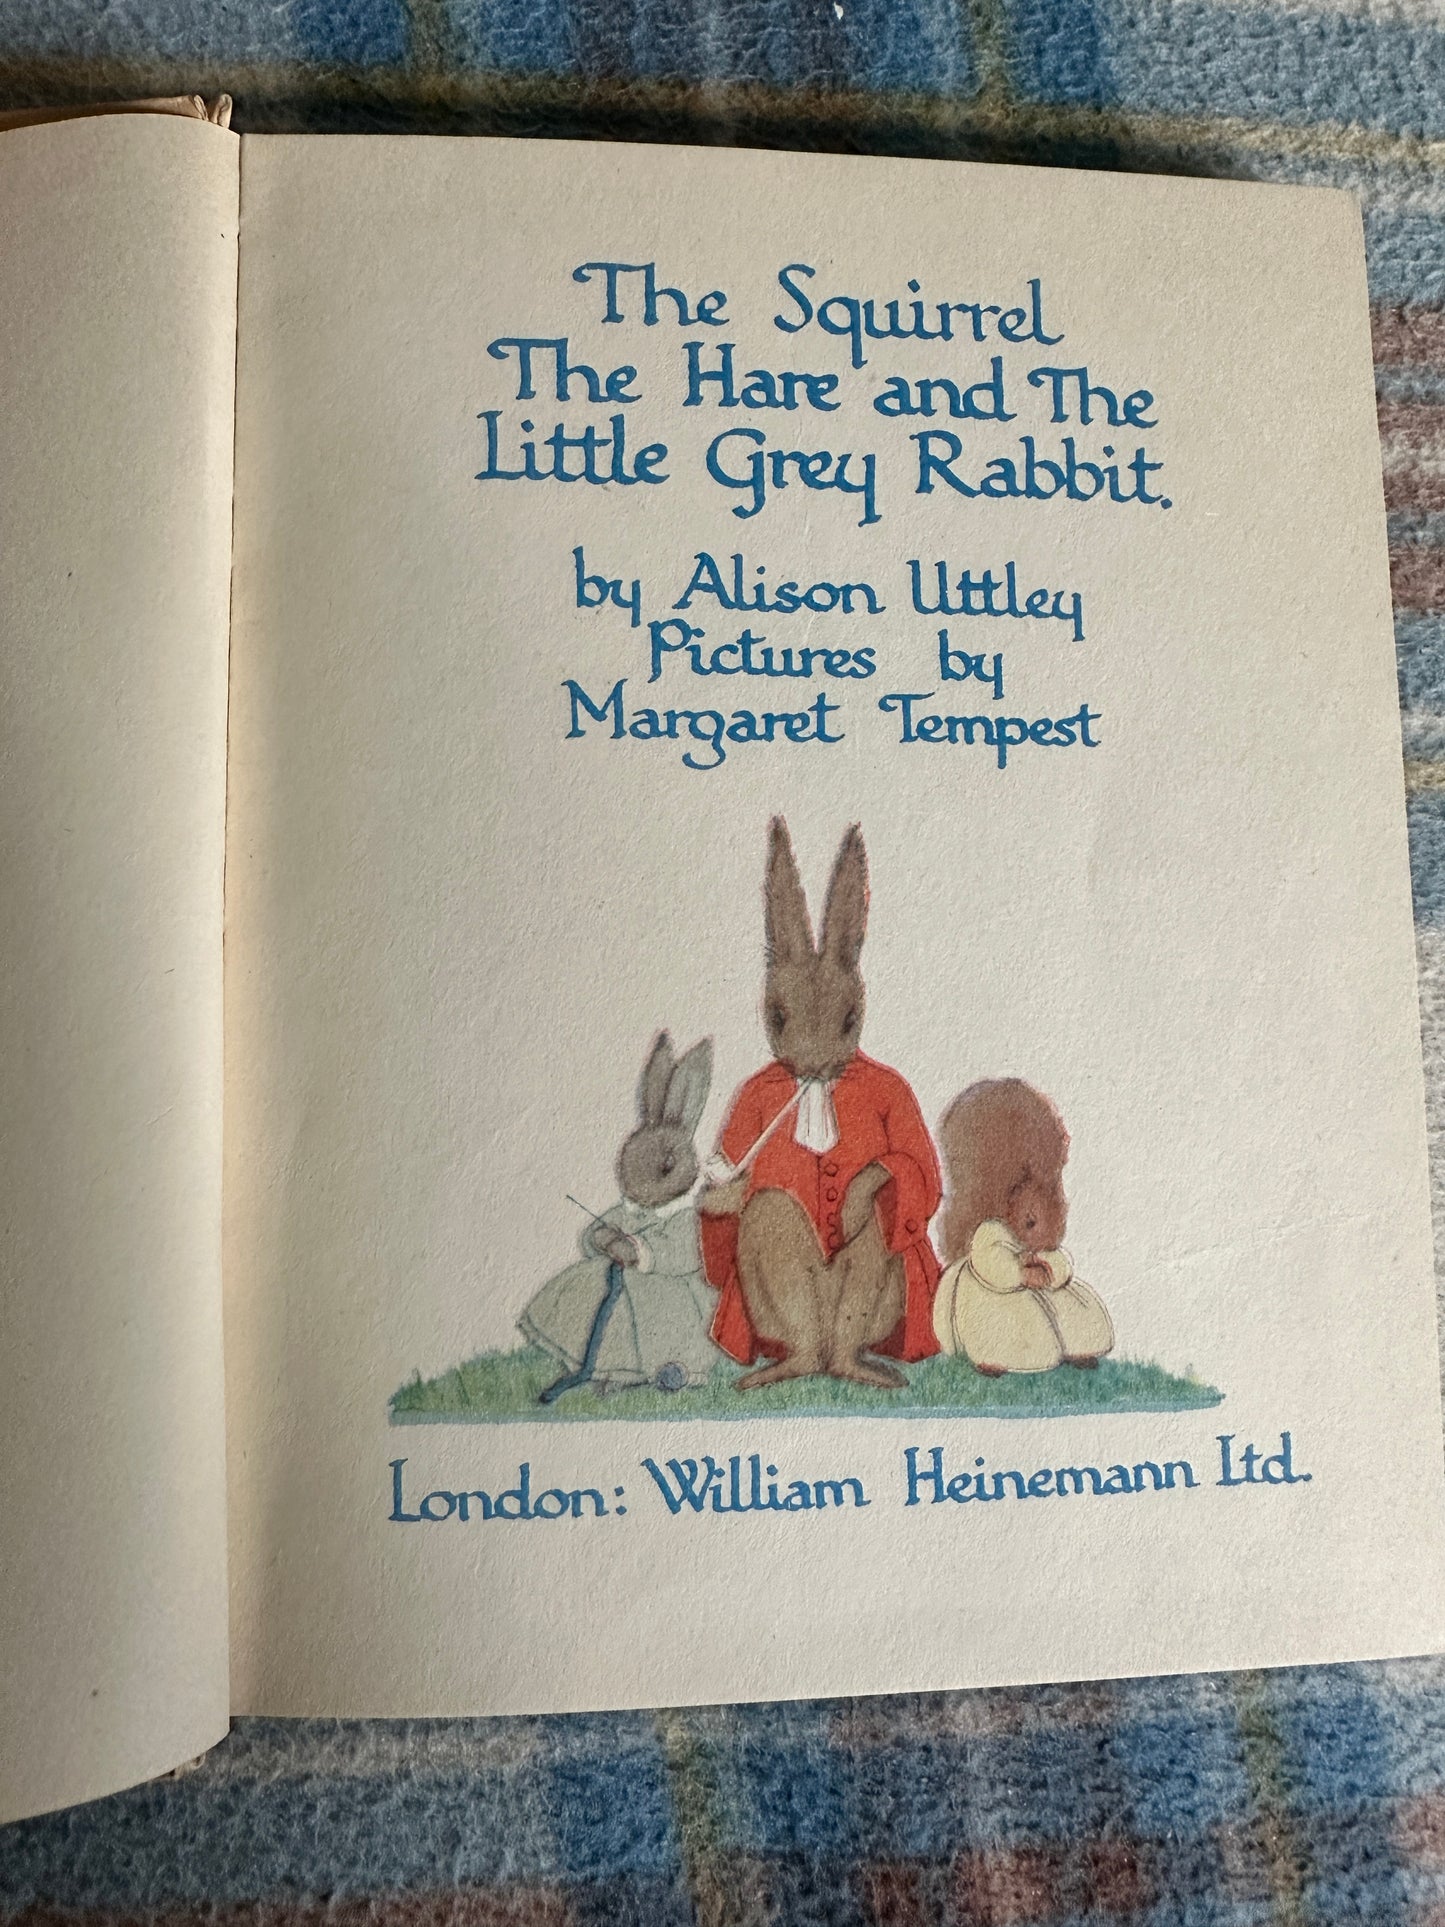 1952 The Squirrel, The Hare & The Little Grey Rabbit - Alison Uttley(Margaret Tempest illustration)Collins